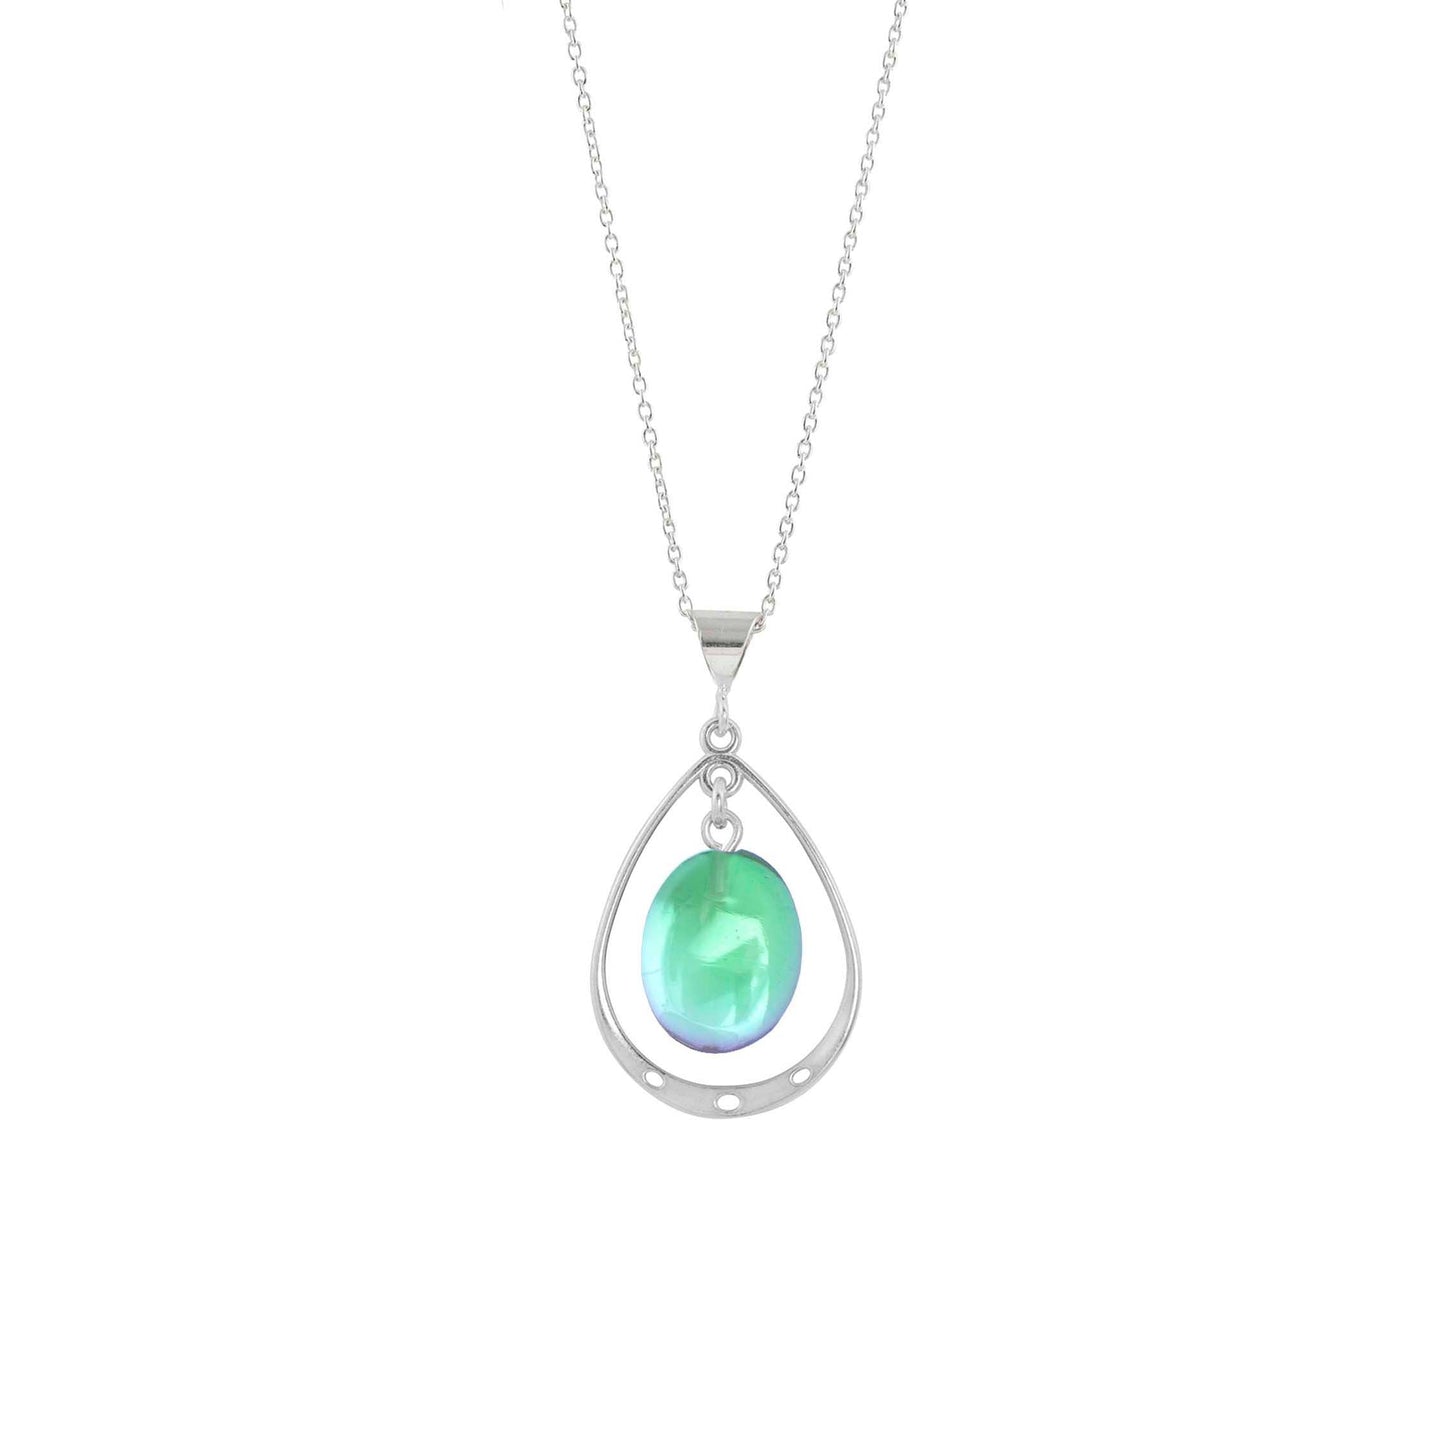 Oval Crystal with Sterling Silver Loop Pendant - Green